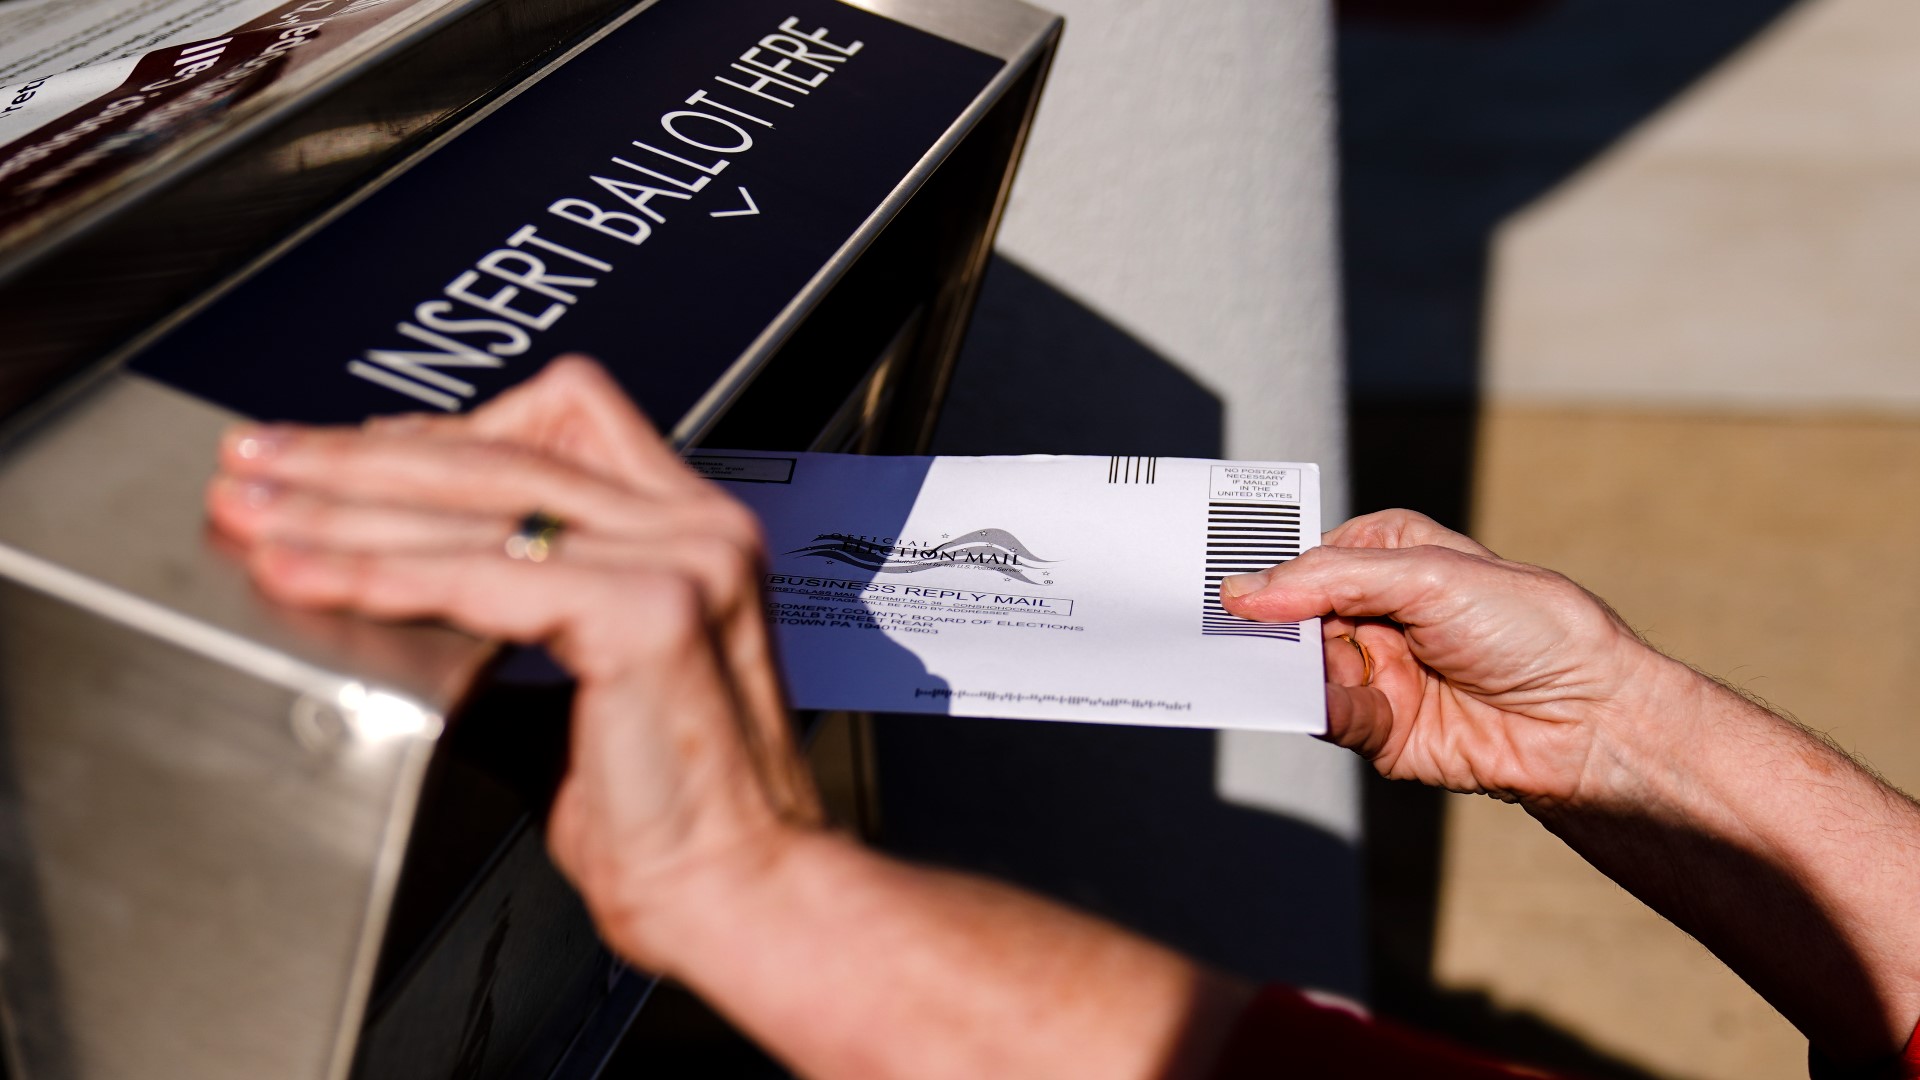 More than one million mail-in ballots have been returned in Pennsylvania, as of Monday.